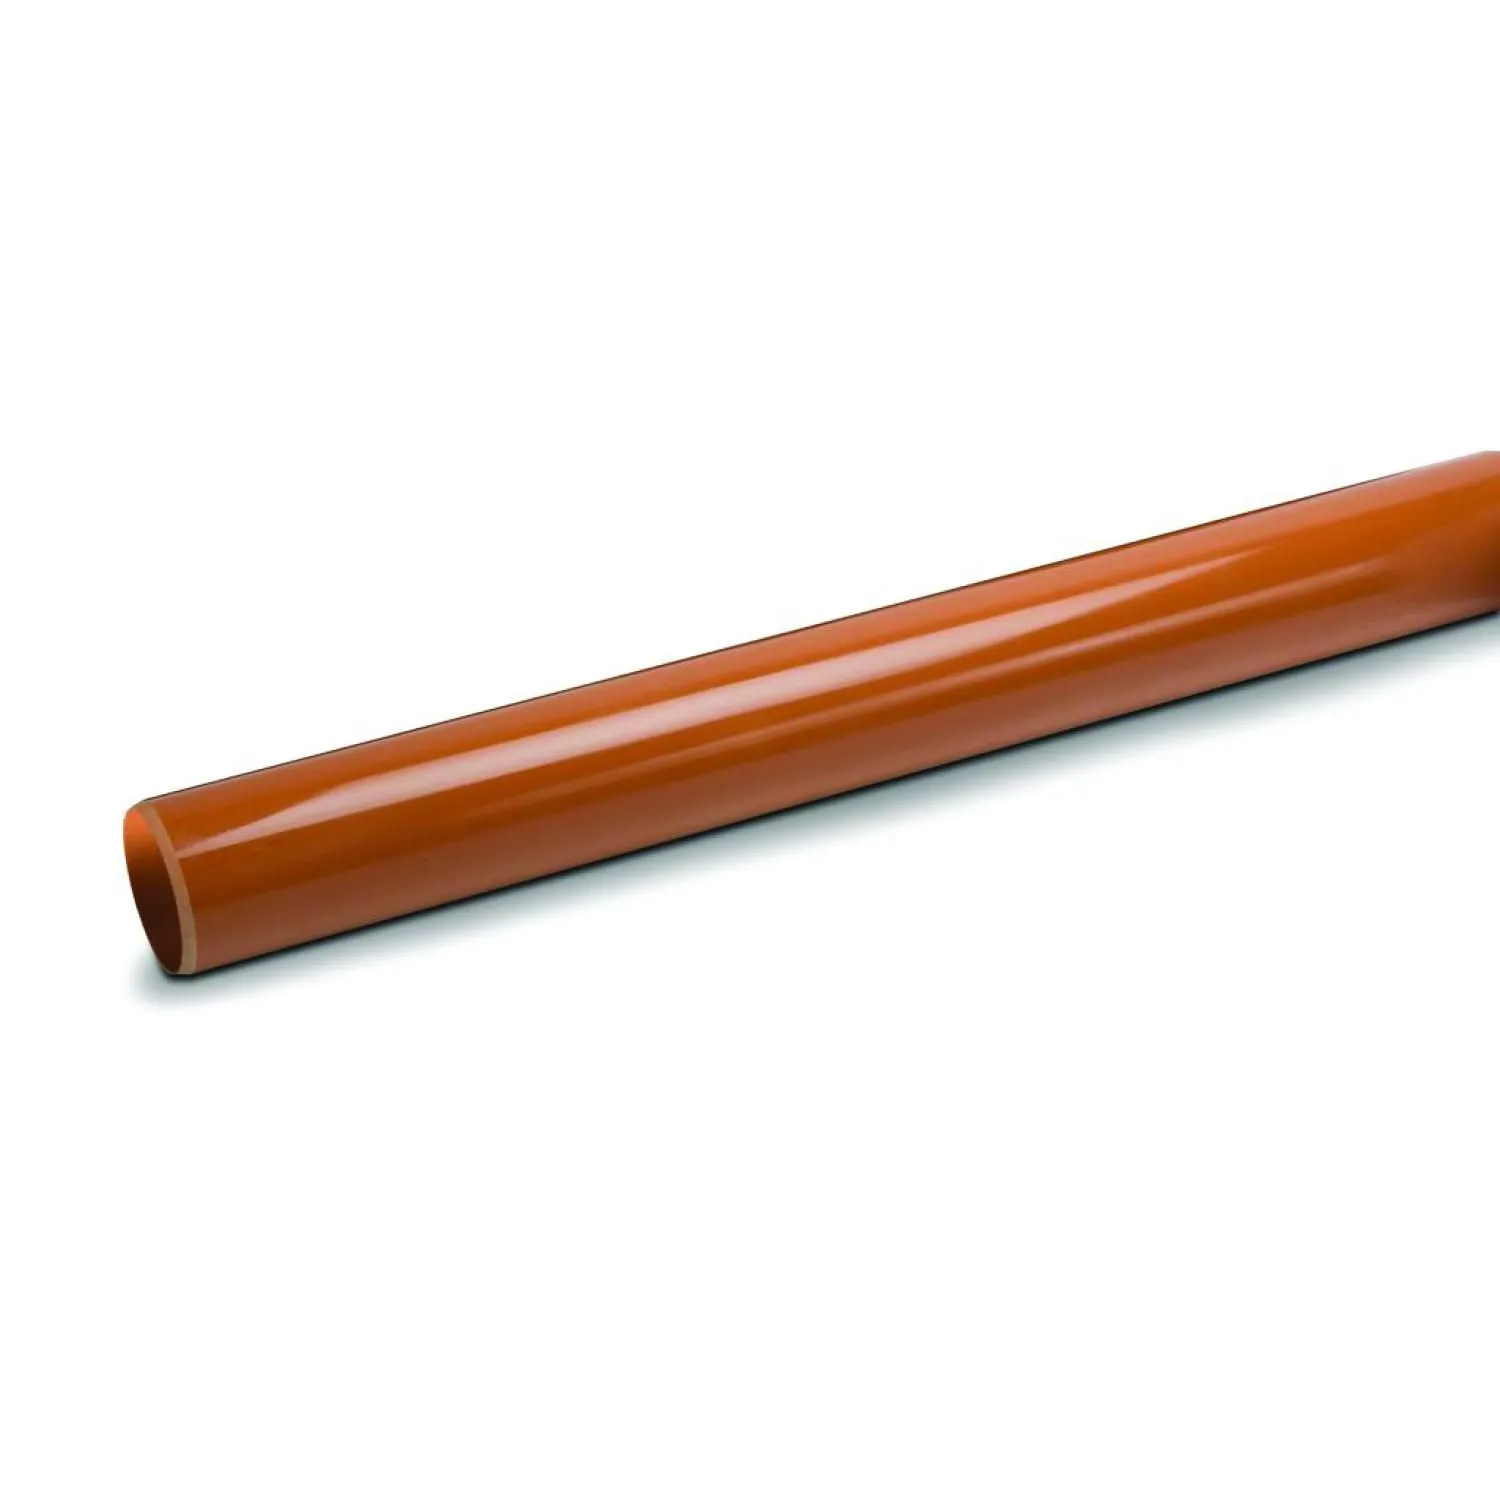 UG430 Polypipe 110mm x 3m Pipe Plain Ended Terracotta